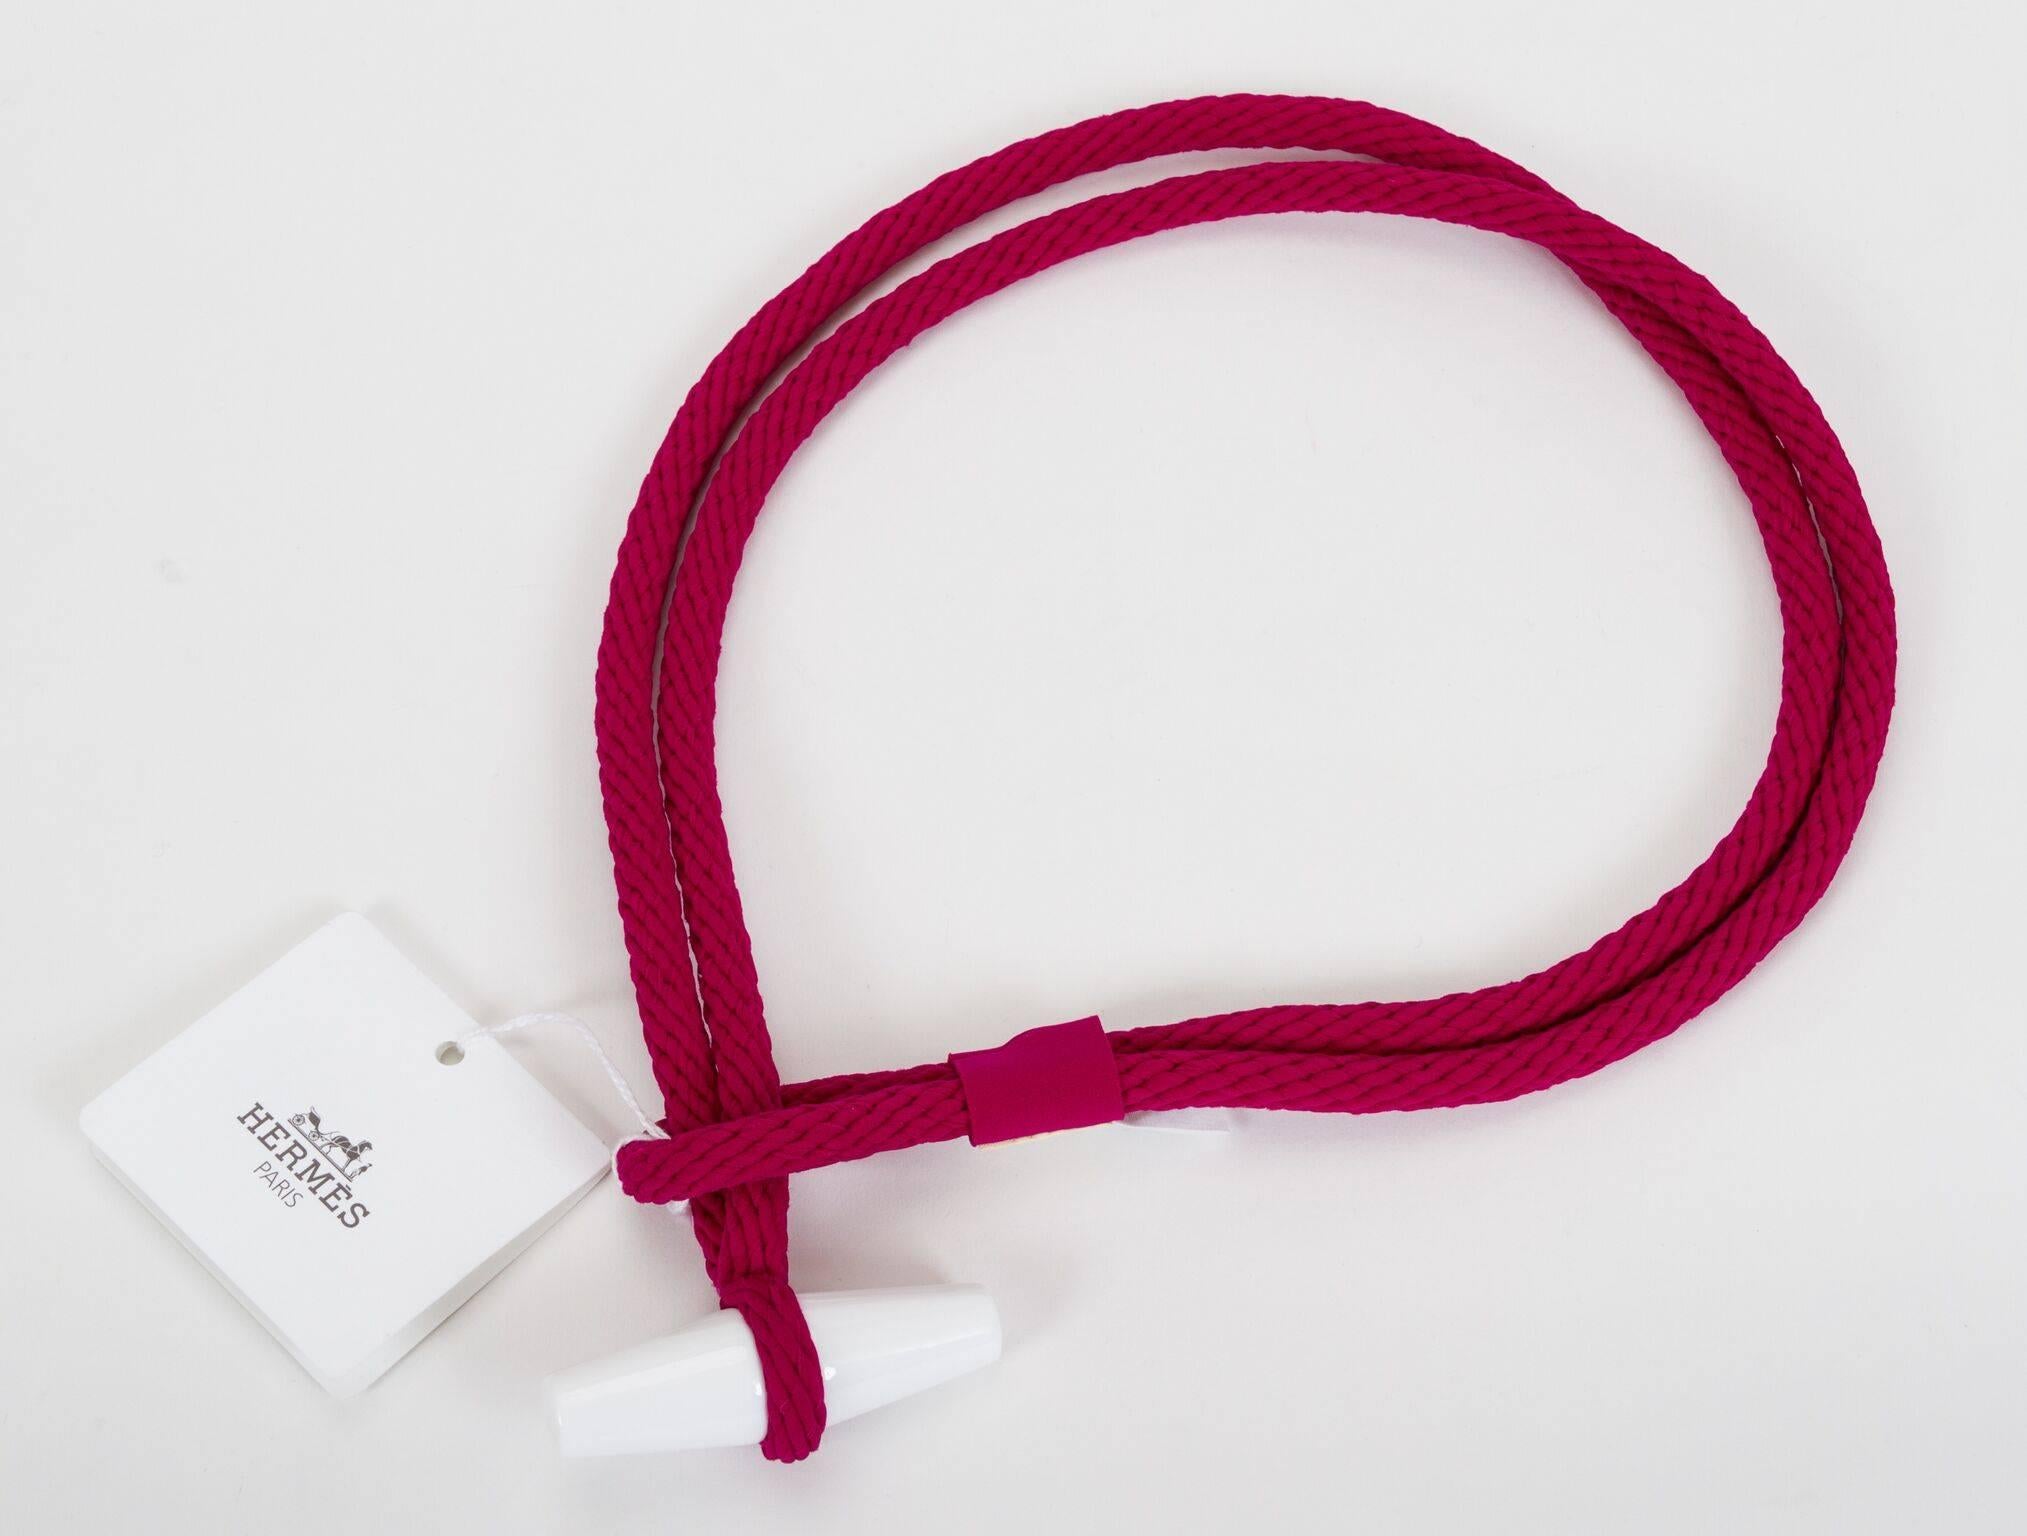 Hermès tricot belt, rouge pourpre and white resin toggle. Brand new with tag. Size small.
